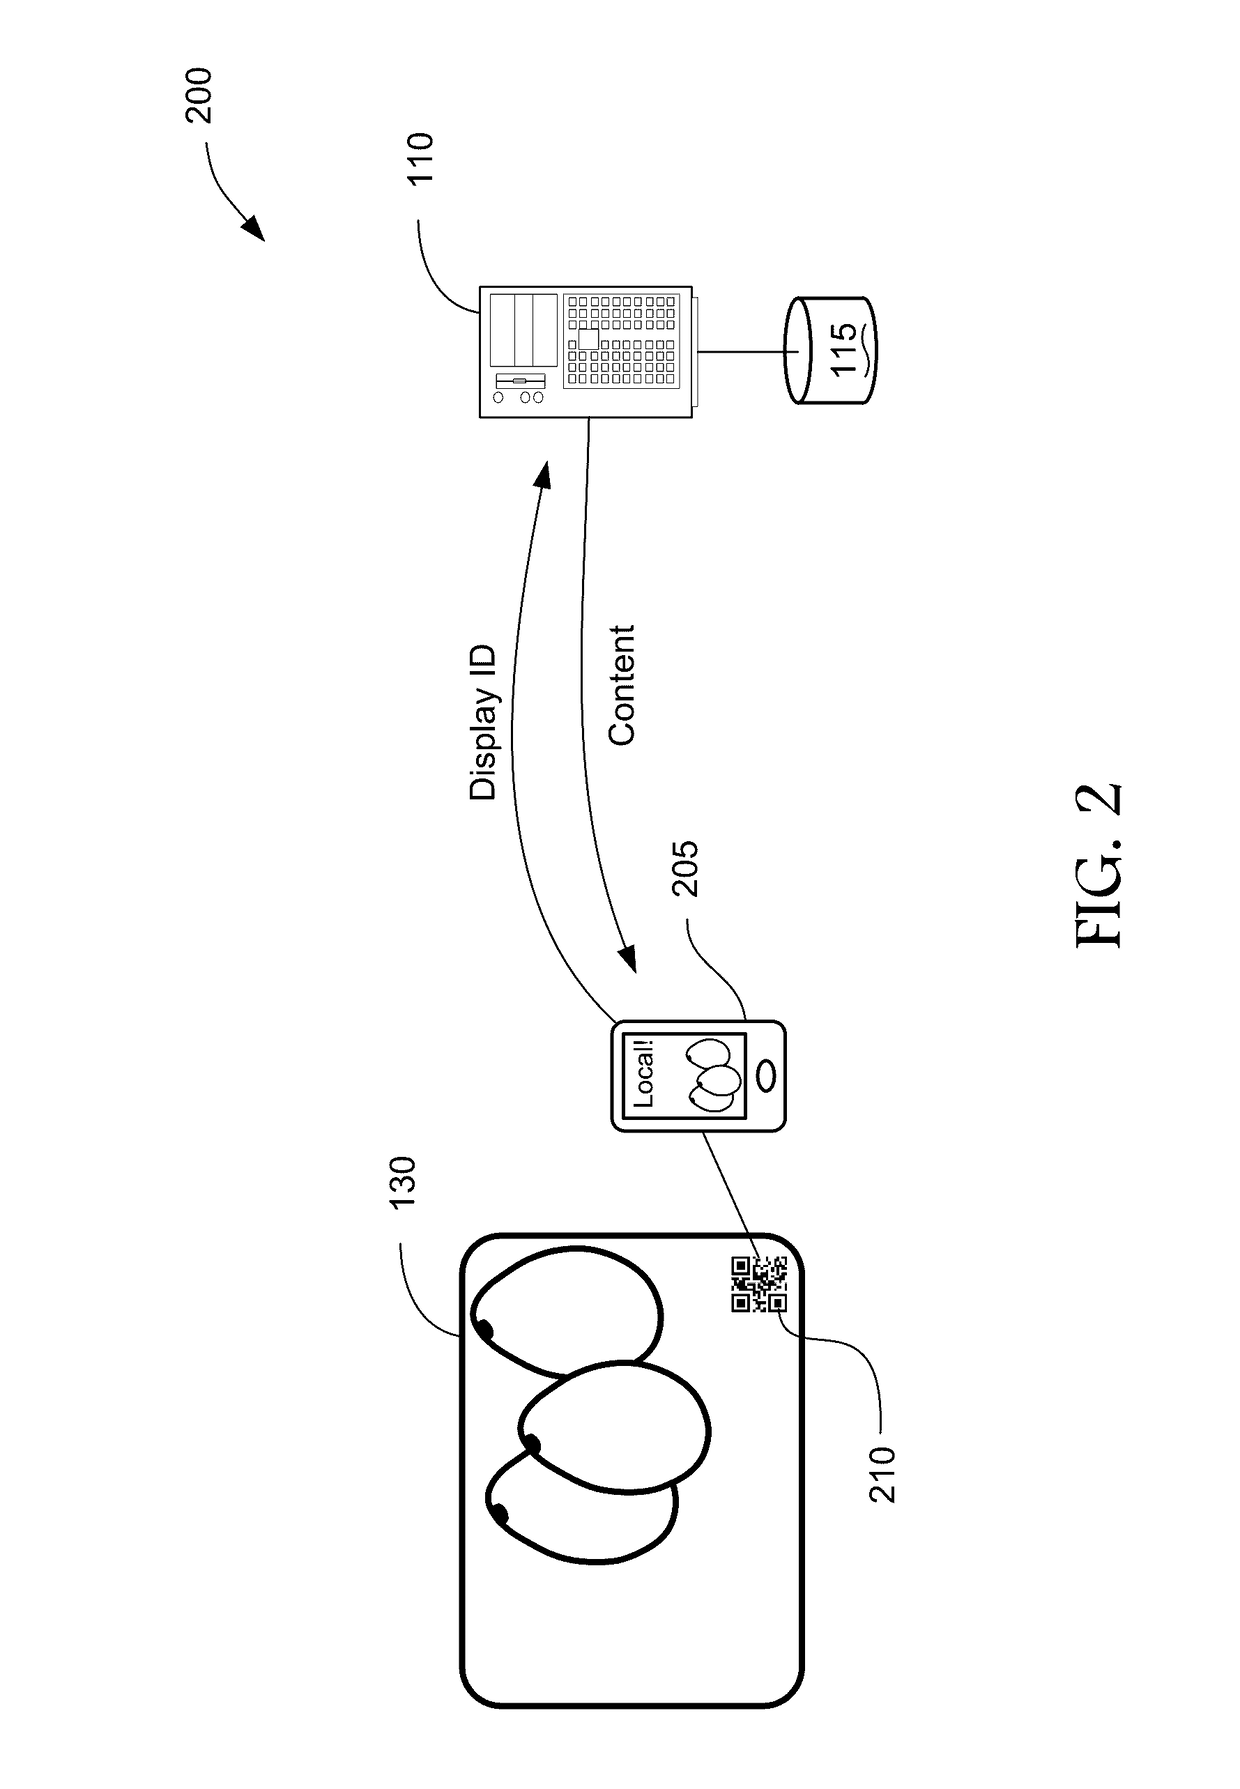 Systems and methods for determining food miles